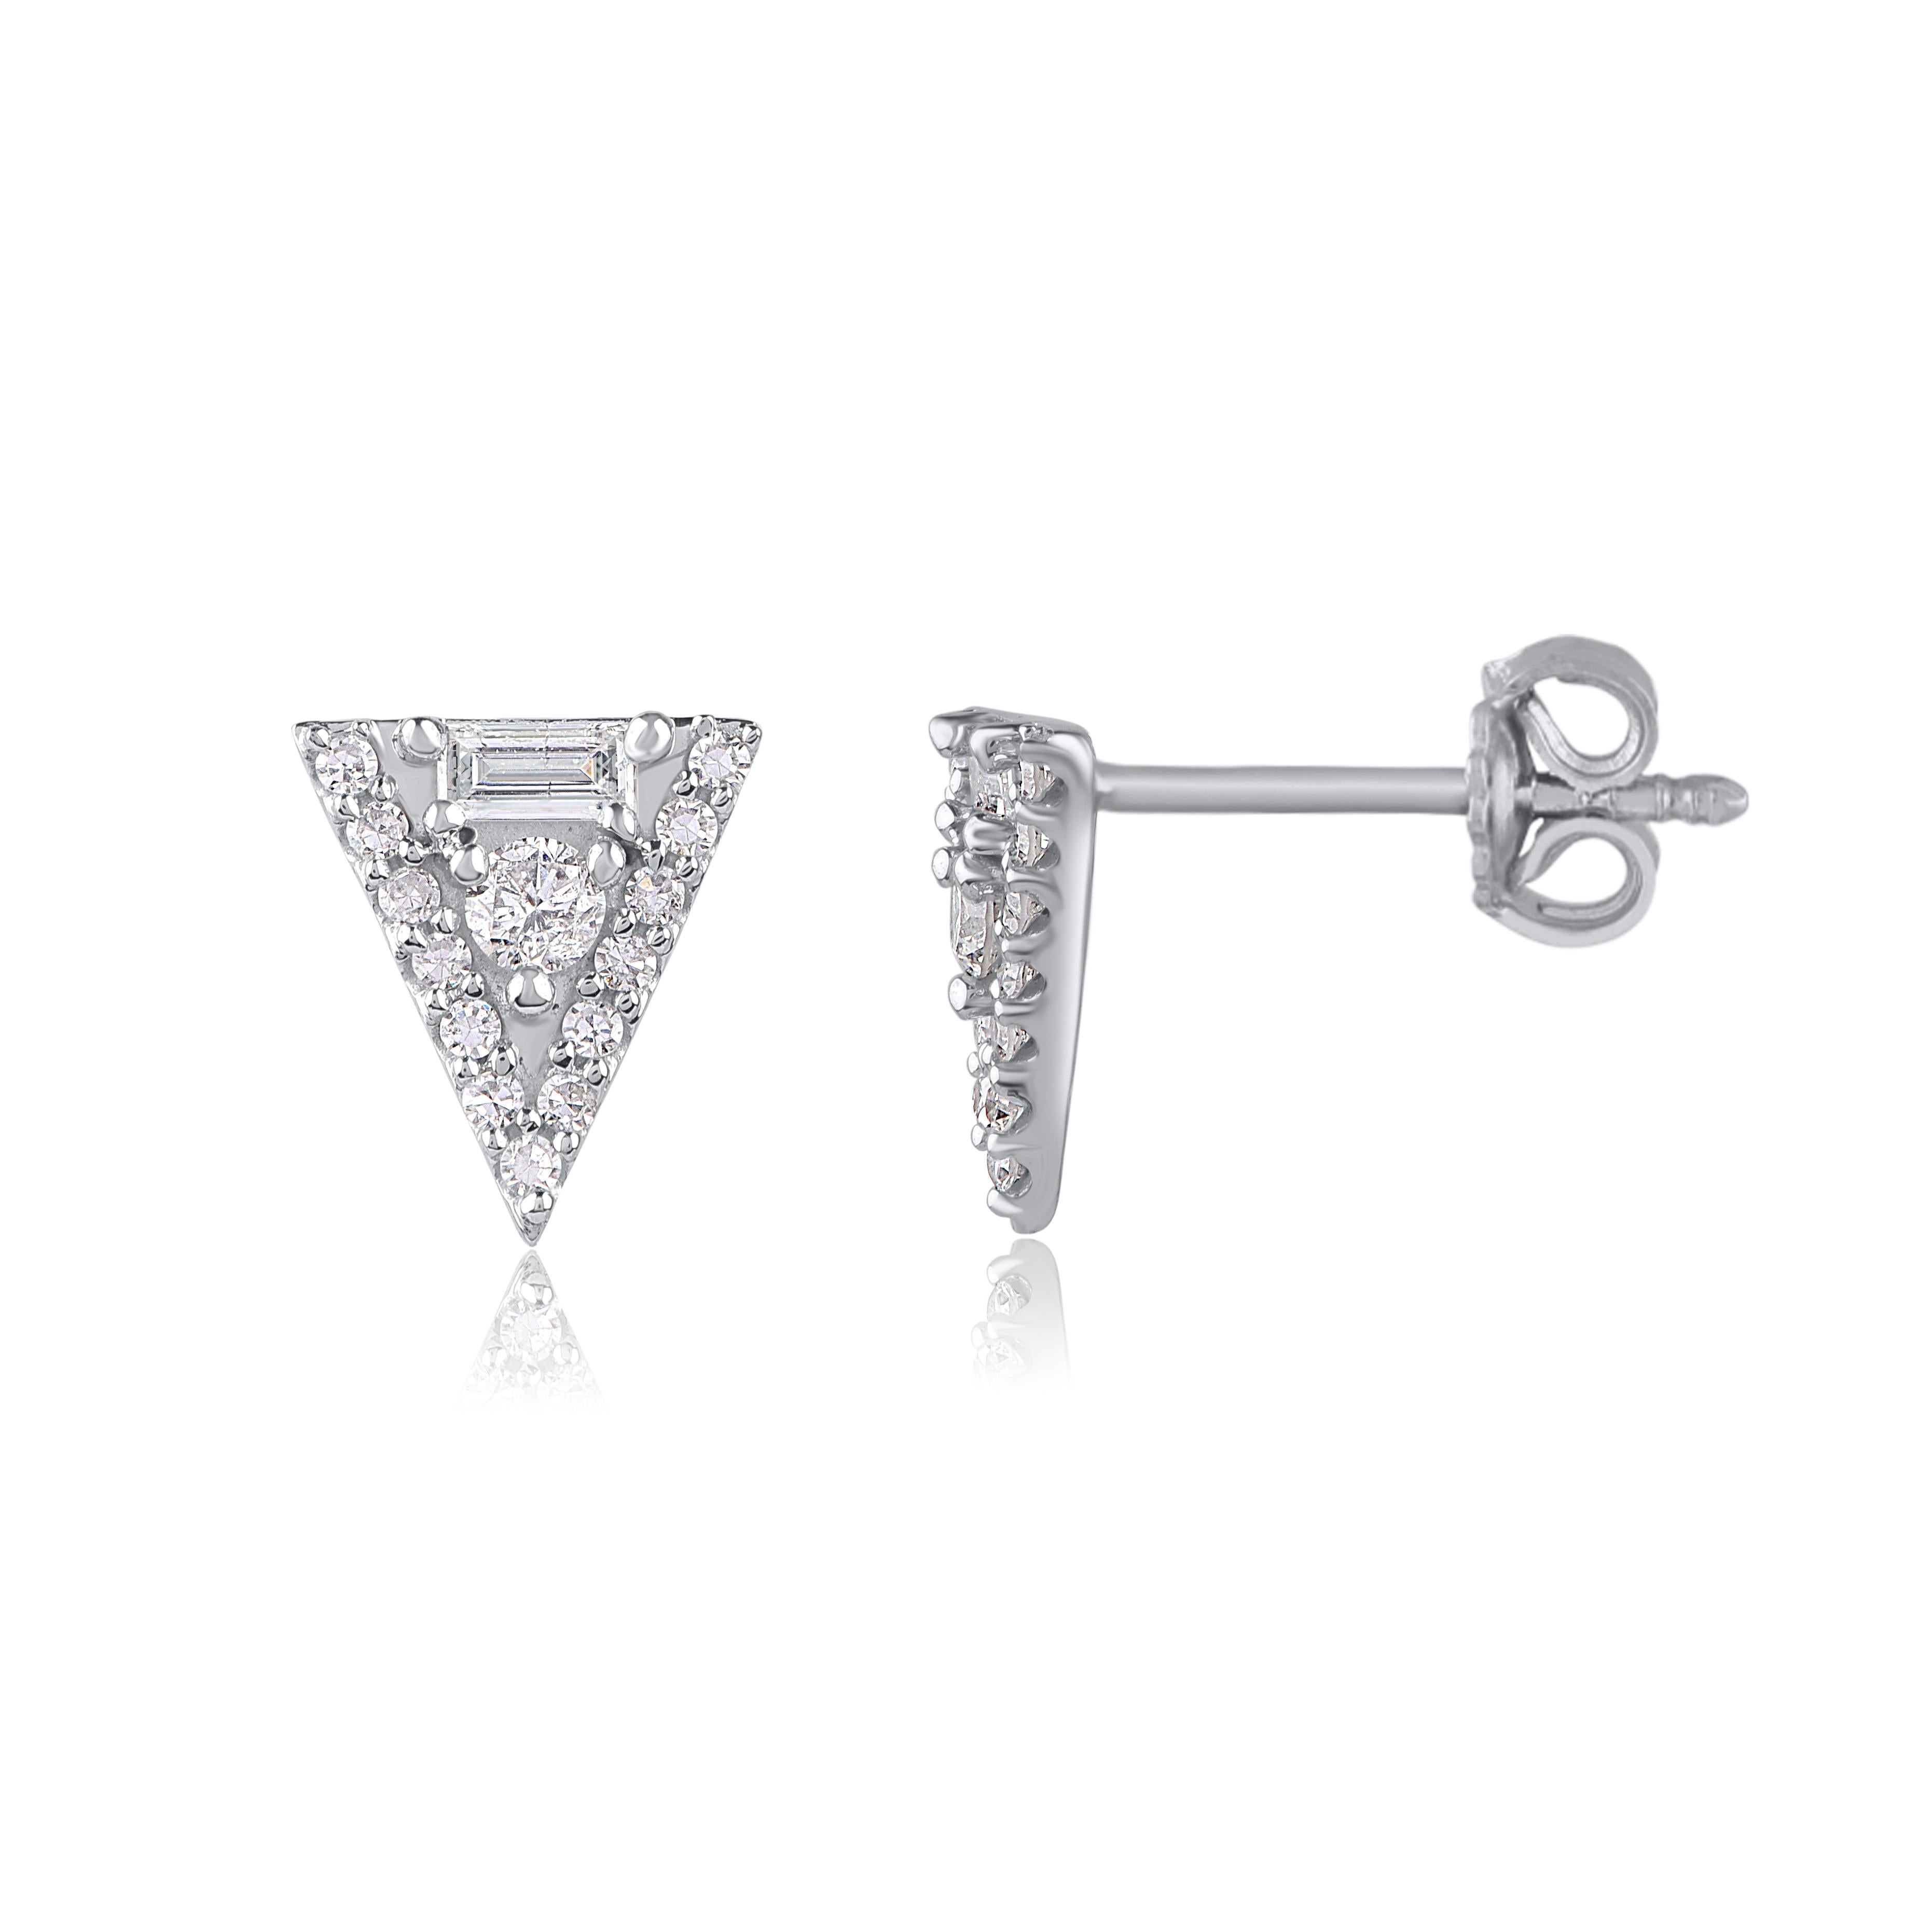 Timeless and elegant, these diamond stud earring are a style you'll wear with every look in your wardrobe. This earring is beautifully designed and studded with 30 natural brilliant cut, single cut diamond and baguette cut diamonds set in prong